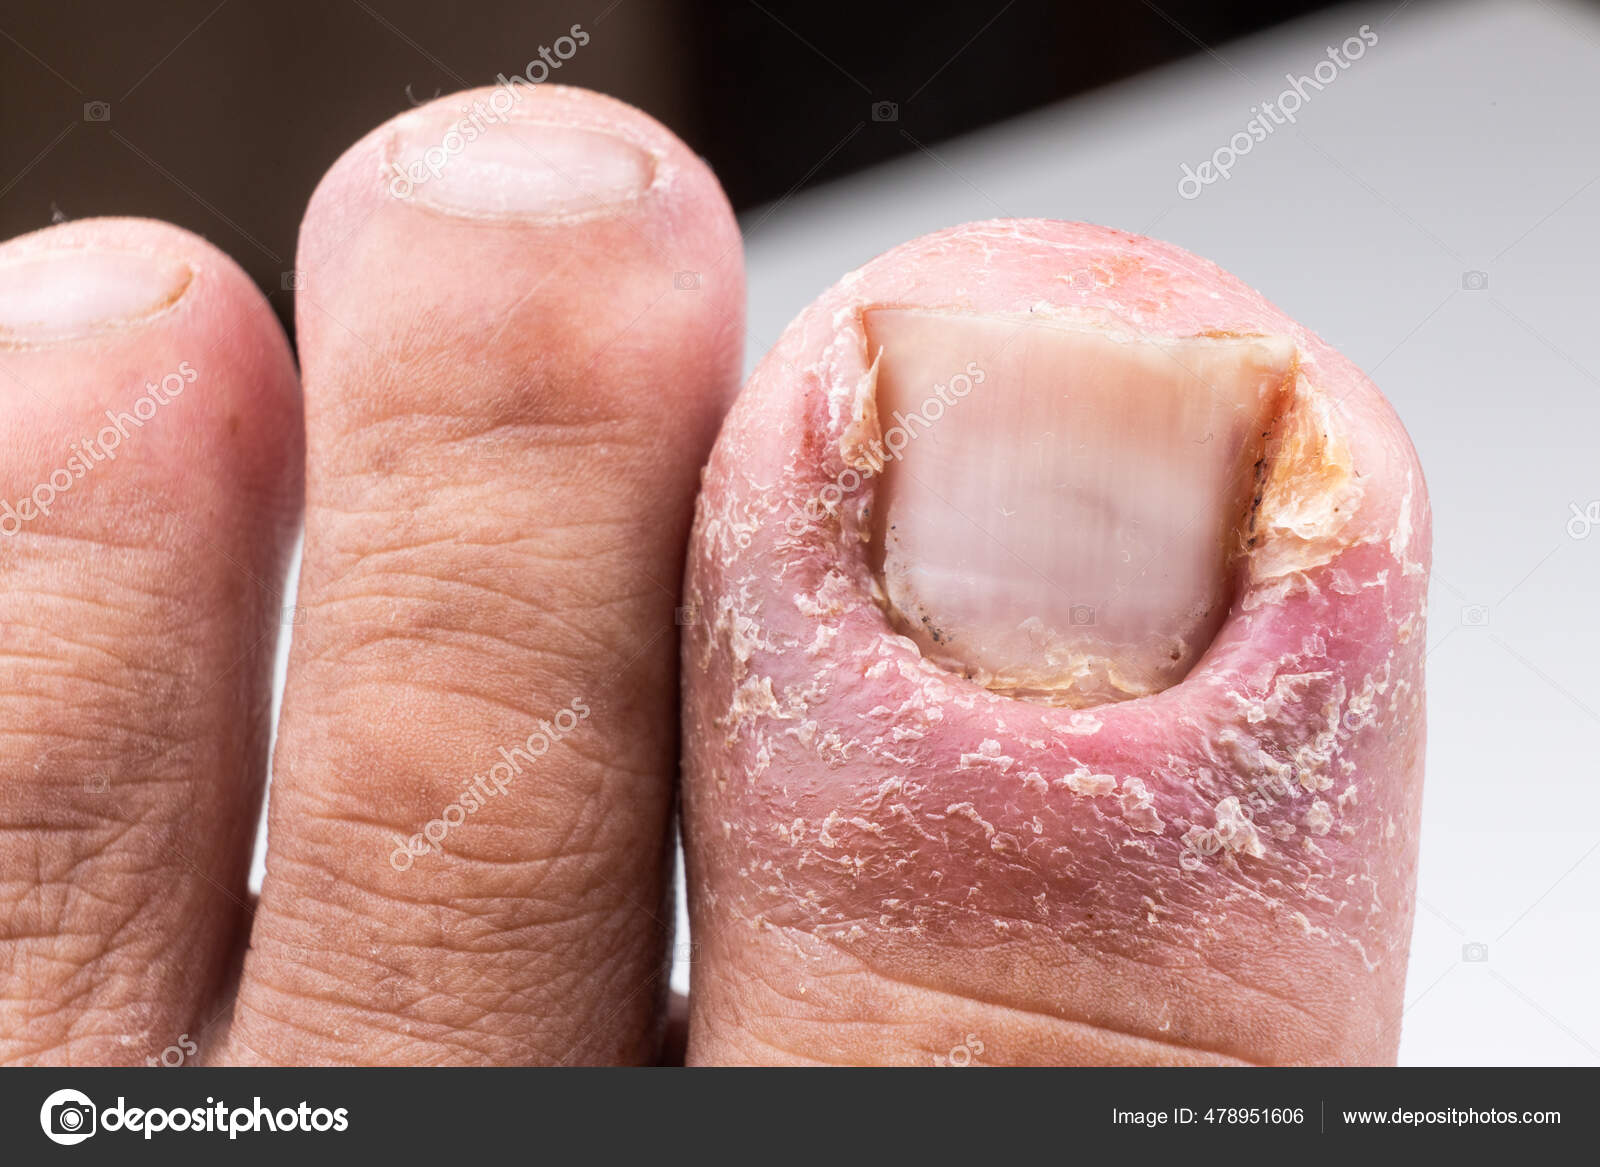 Pseudomonas bacterial nail infection - Stock Image - C049/5542 - Science  Photo Library